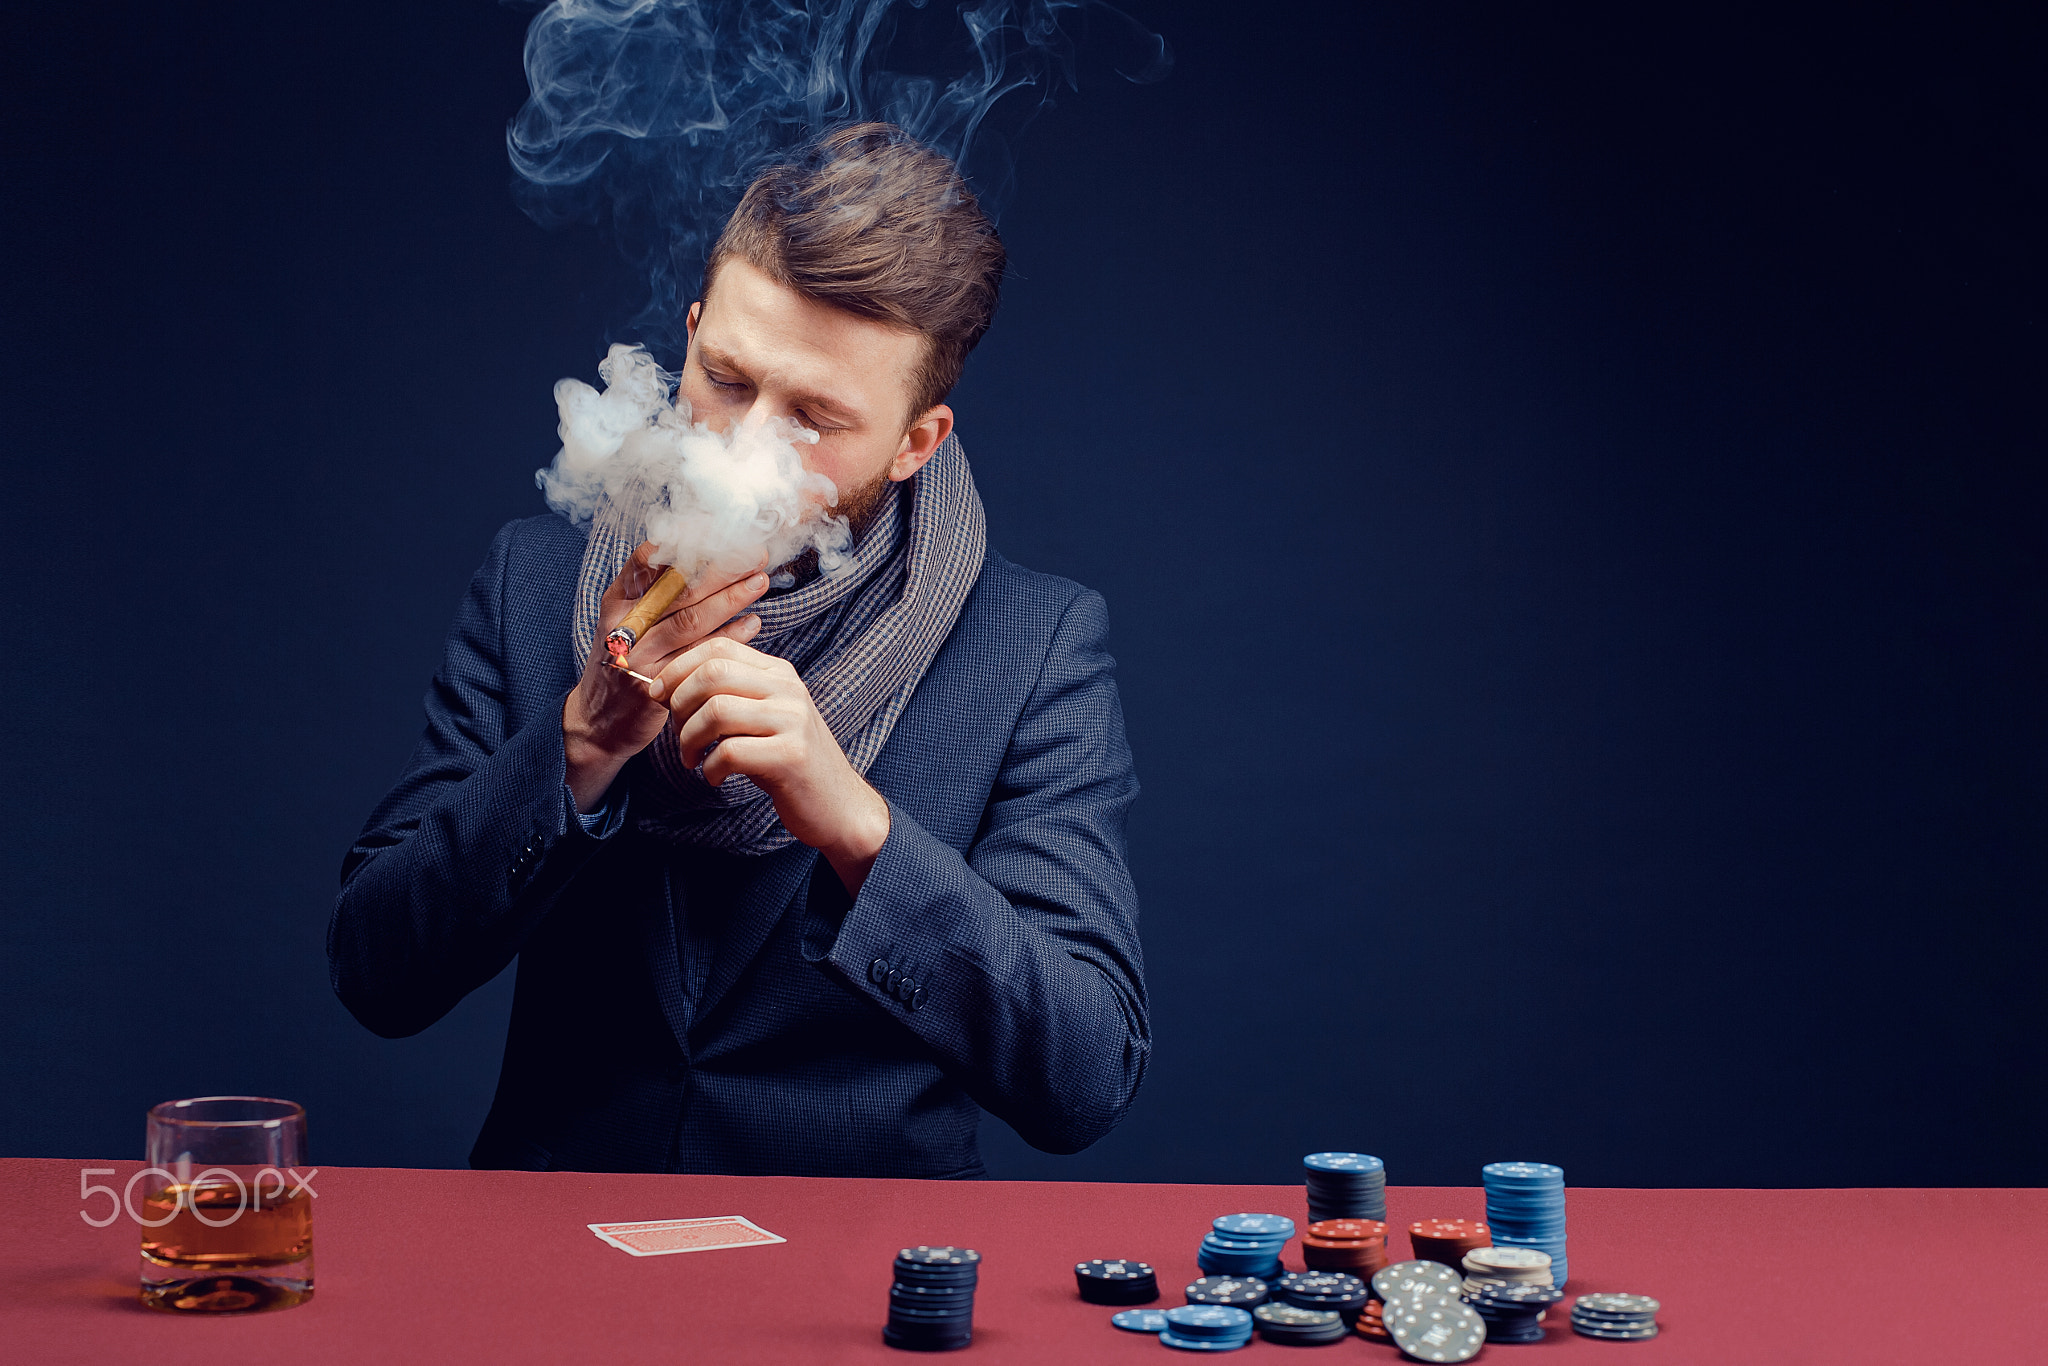 Stylish bearded Man in suit and scarf playing in dark casino, smoking